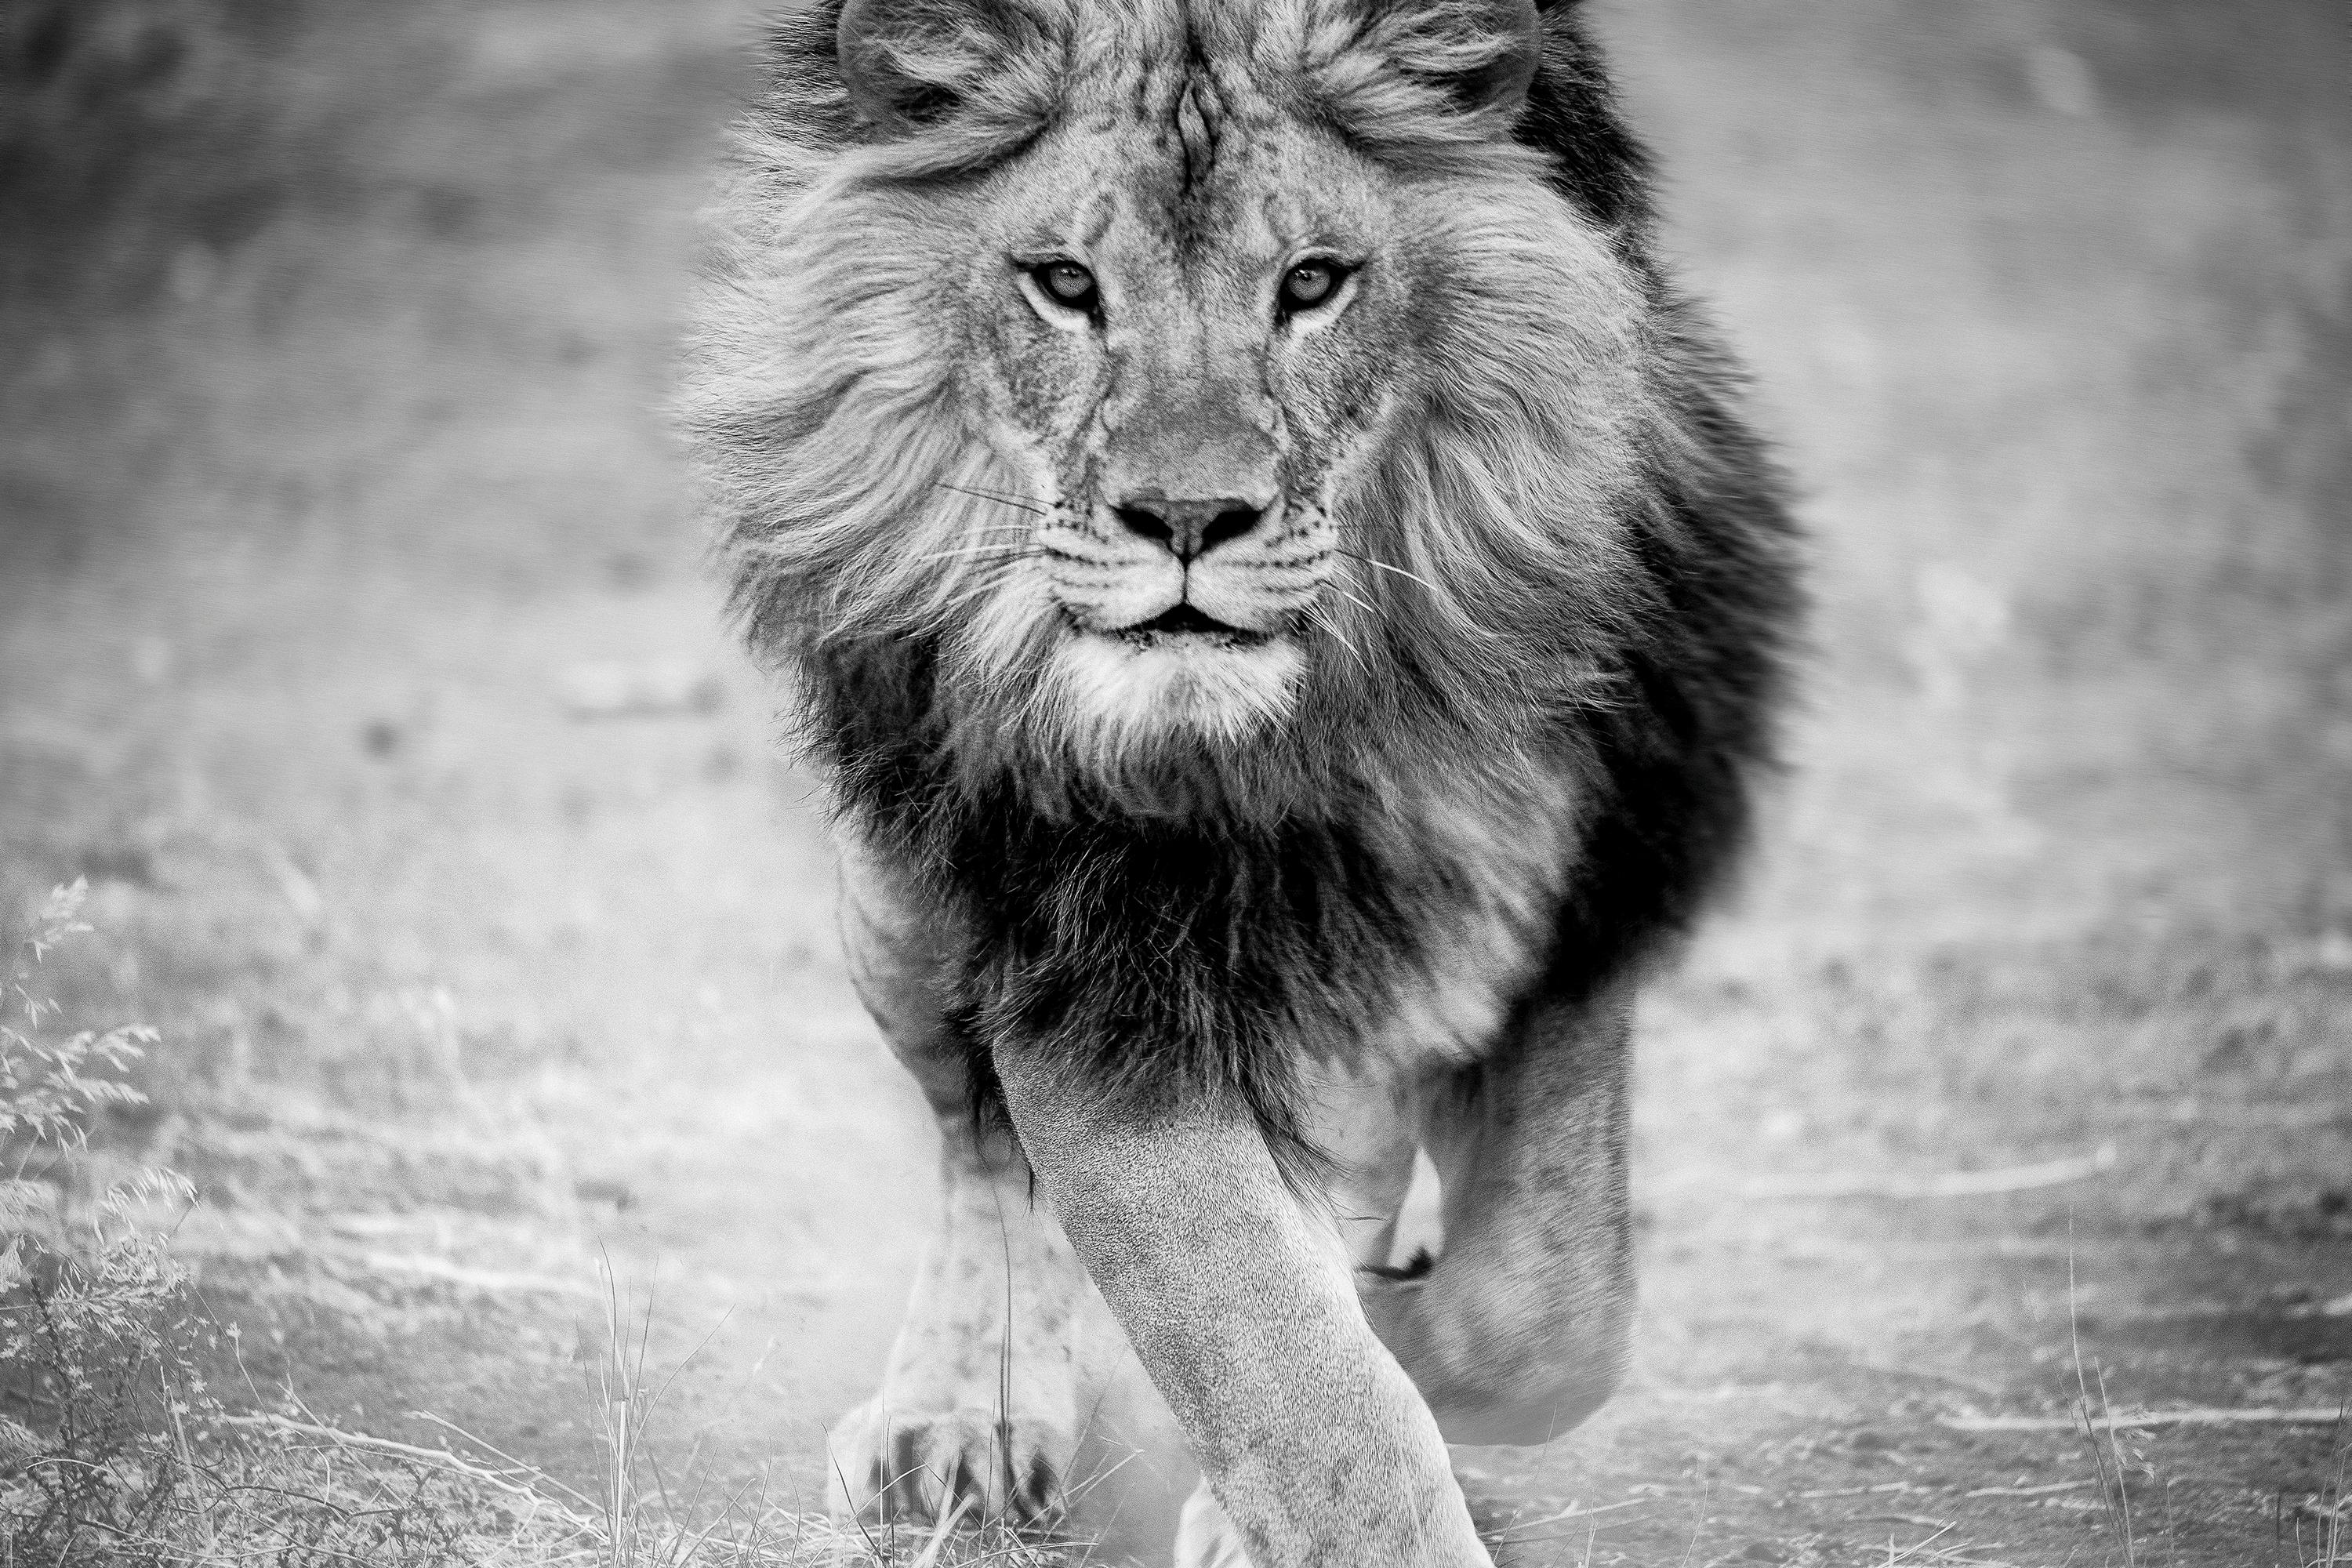 Shane Russeck Black and White Photograph - "Panthera Leo" 36x48 - Black & White Photography, Lion 